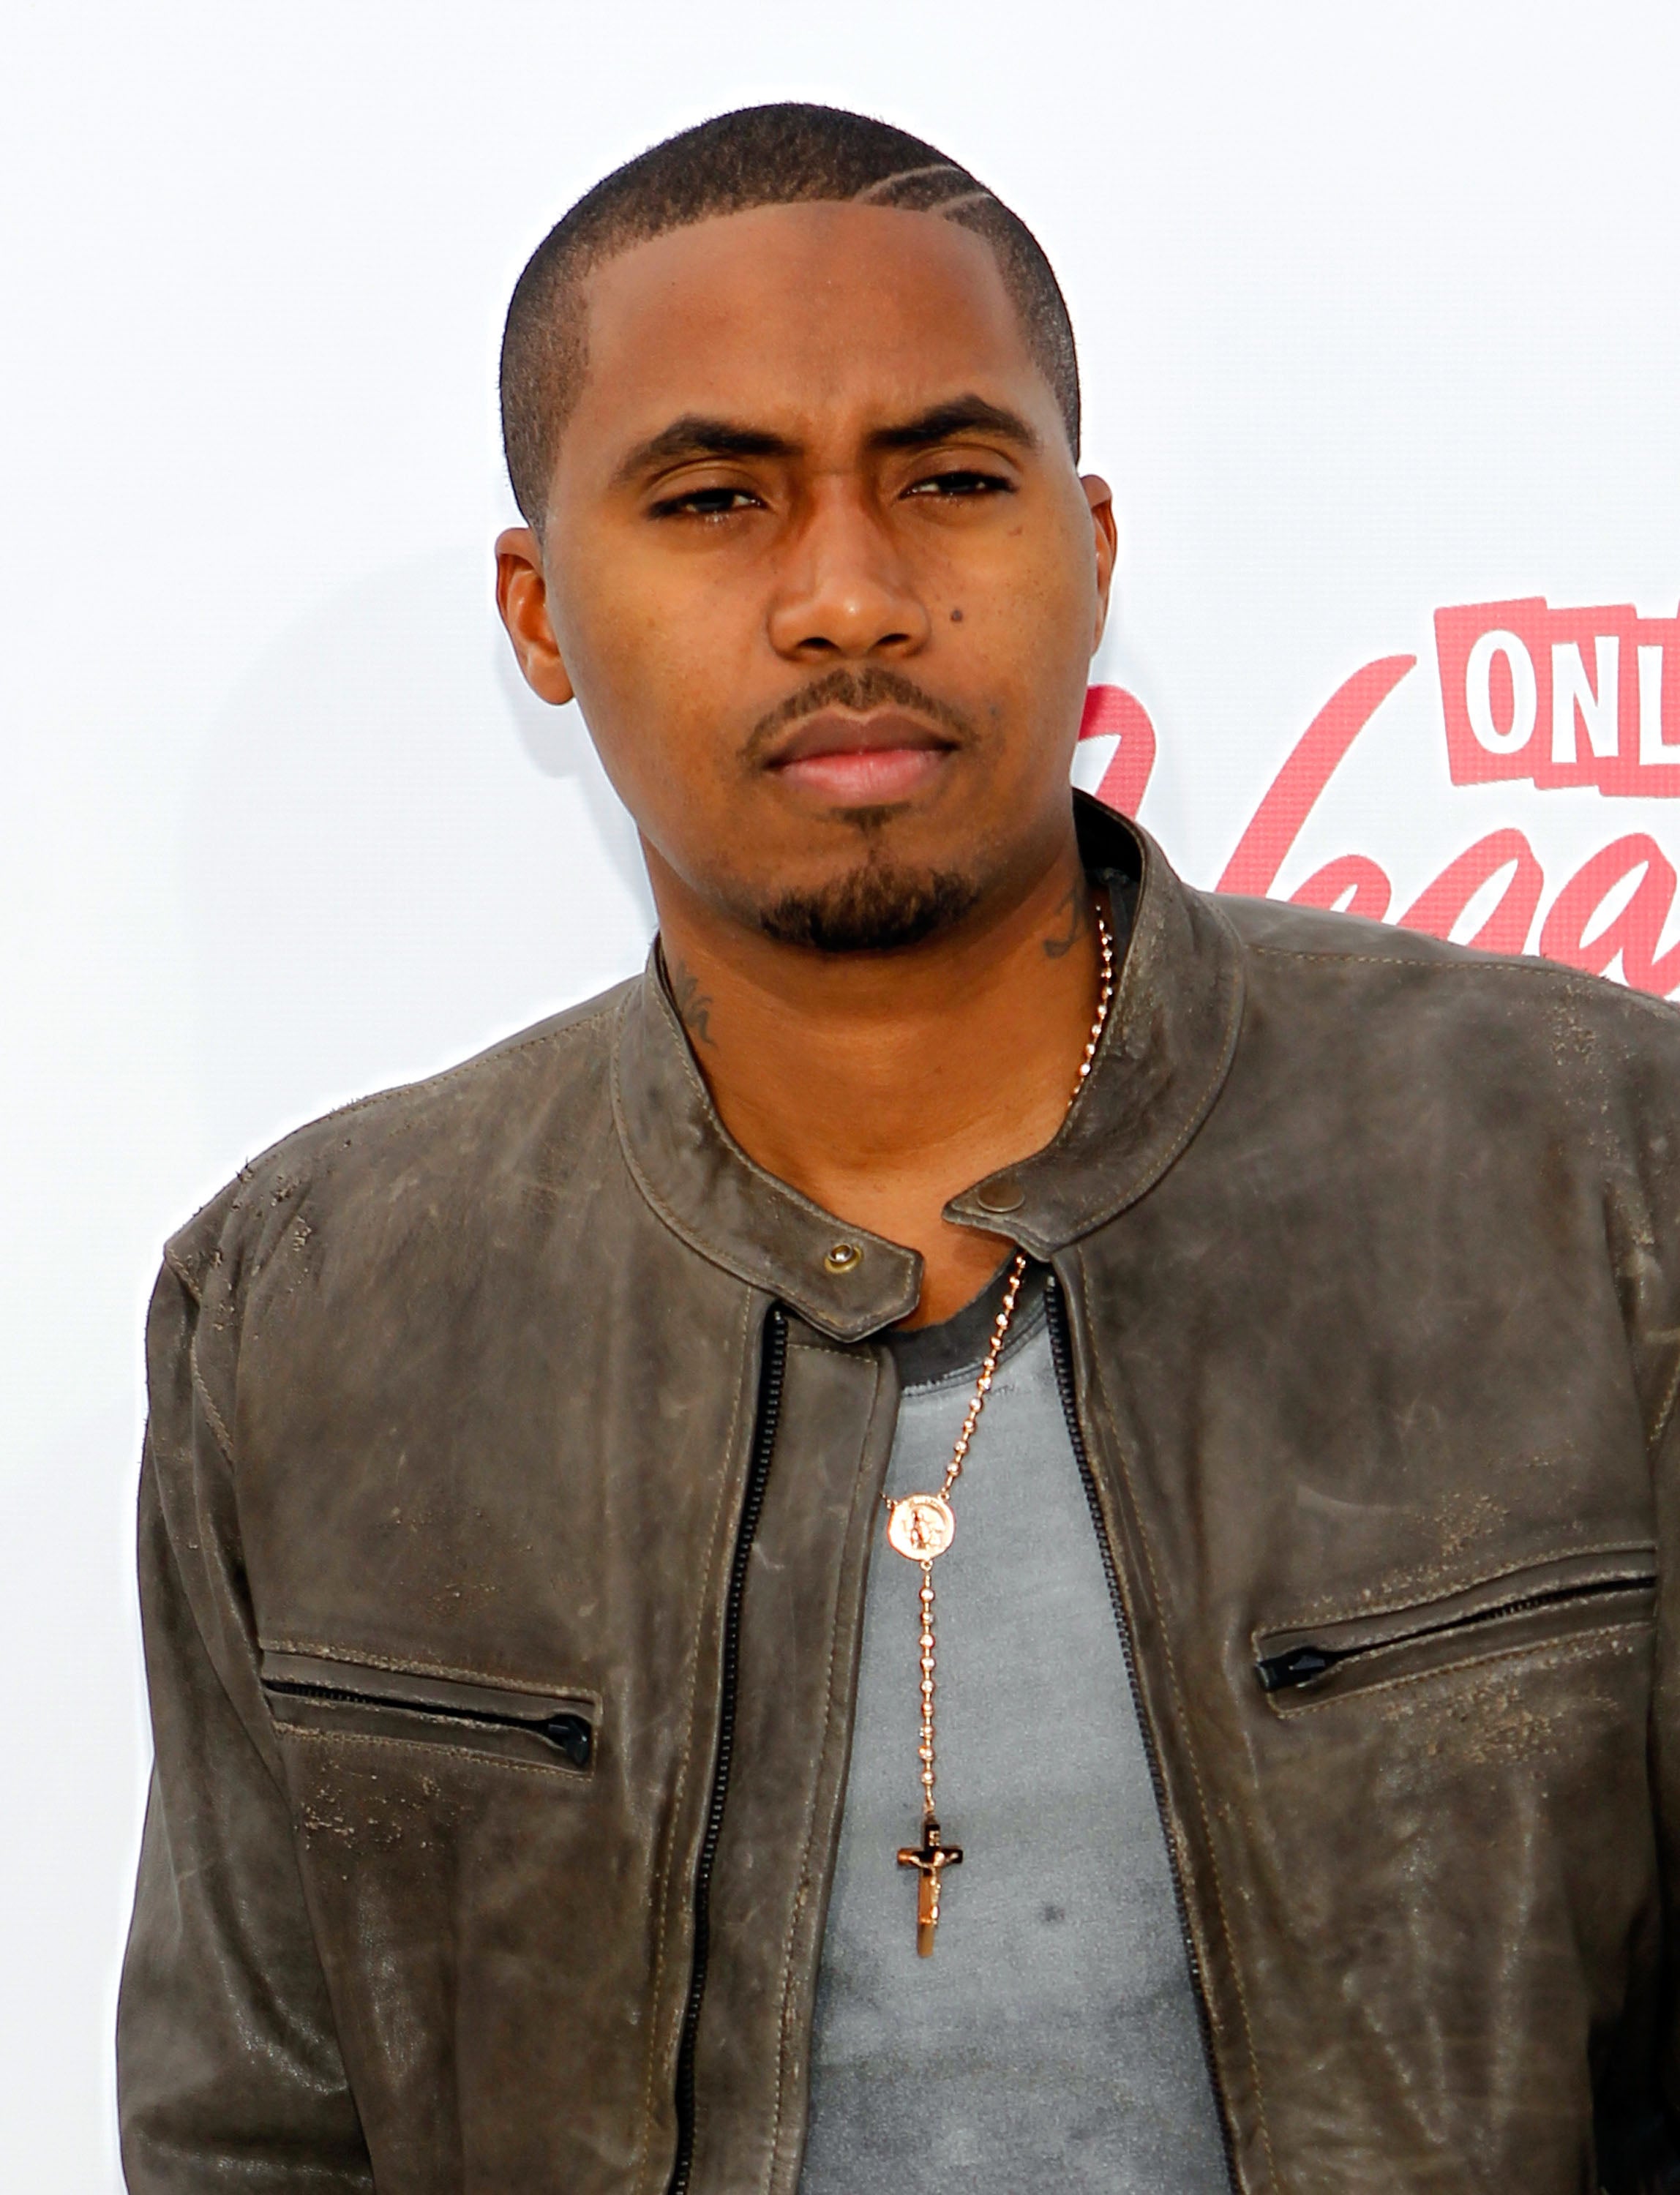 Does Nas Go Too Far With 'Daughters'?